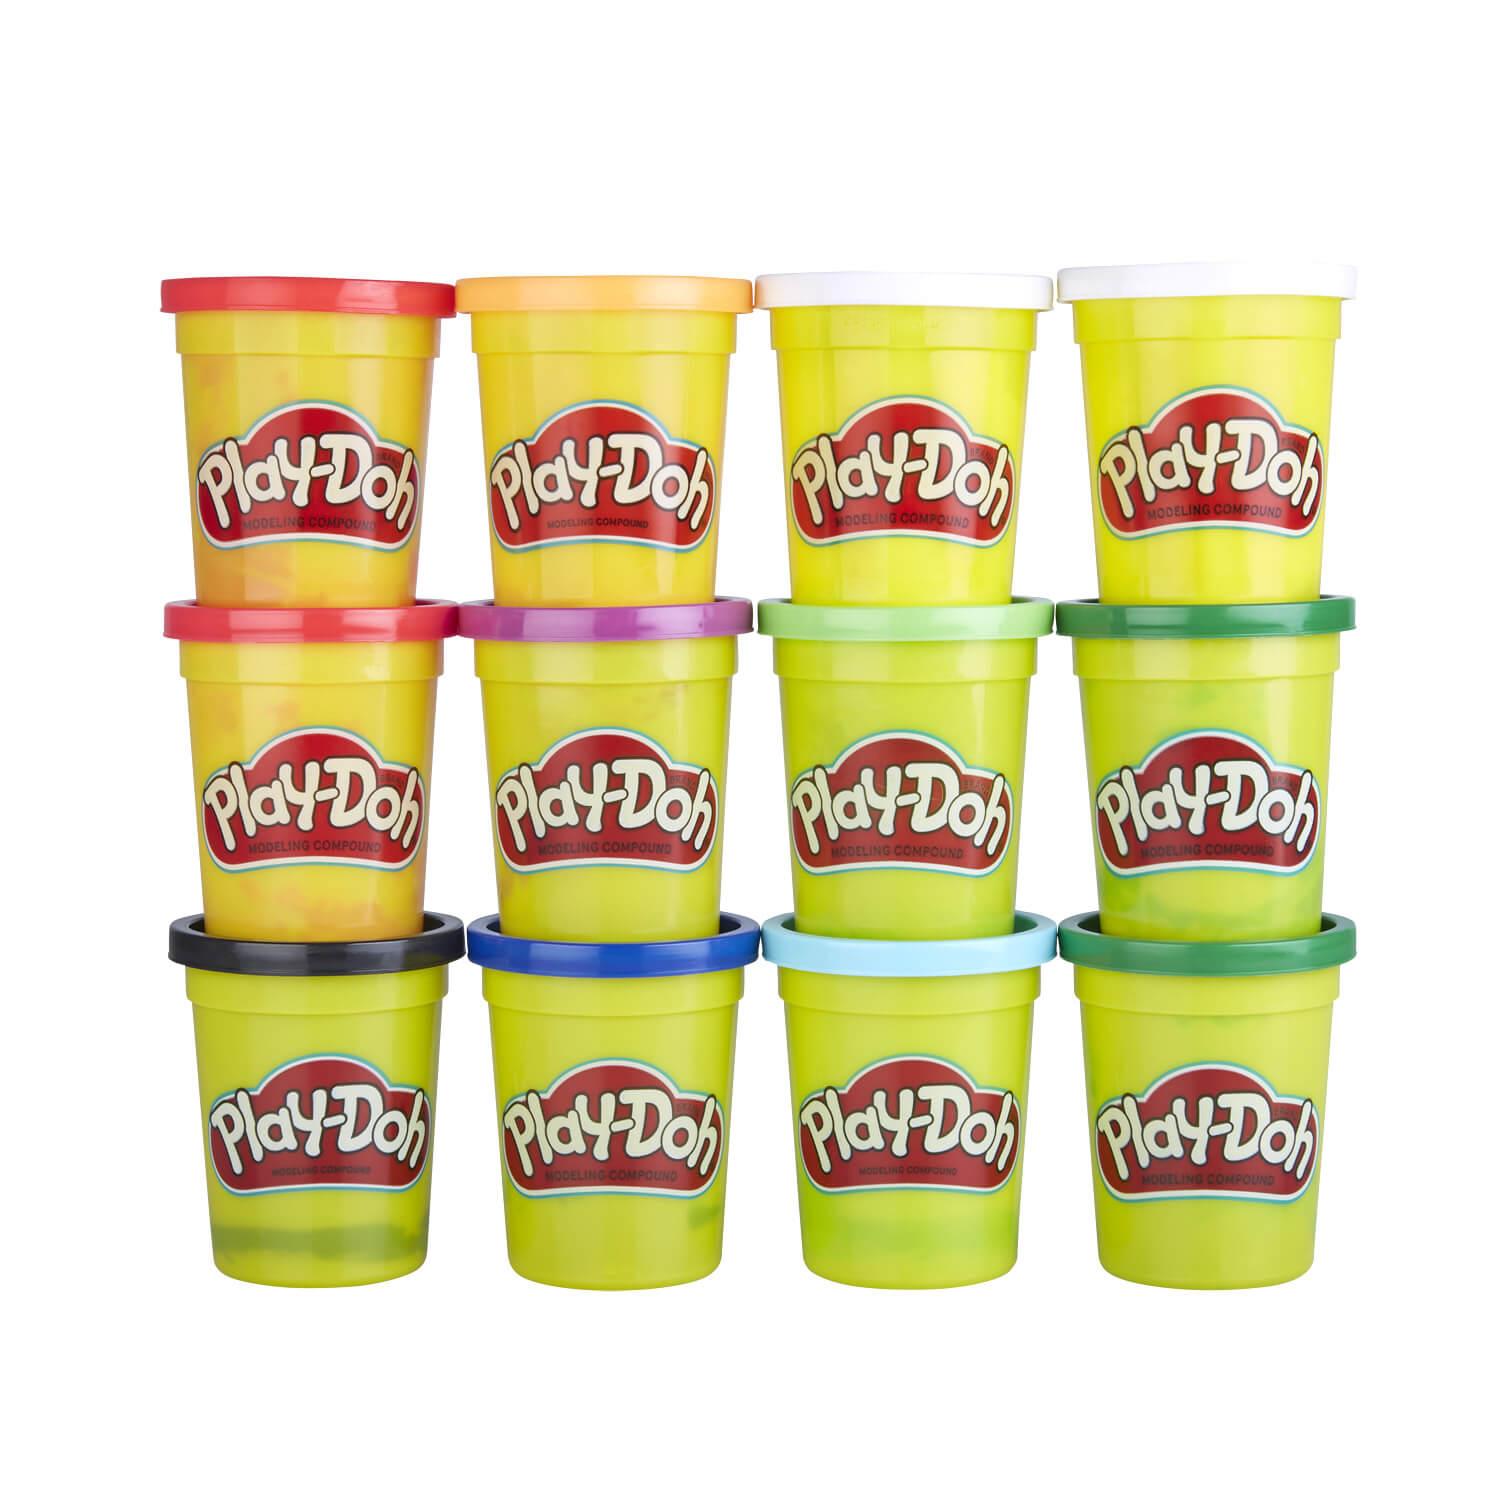 4 POTS RECHARGE PATE A MODELER PLAY-DOH